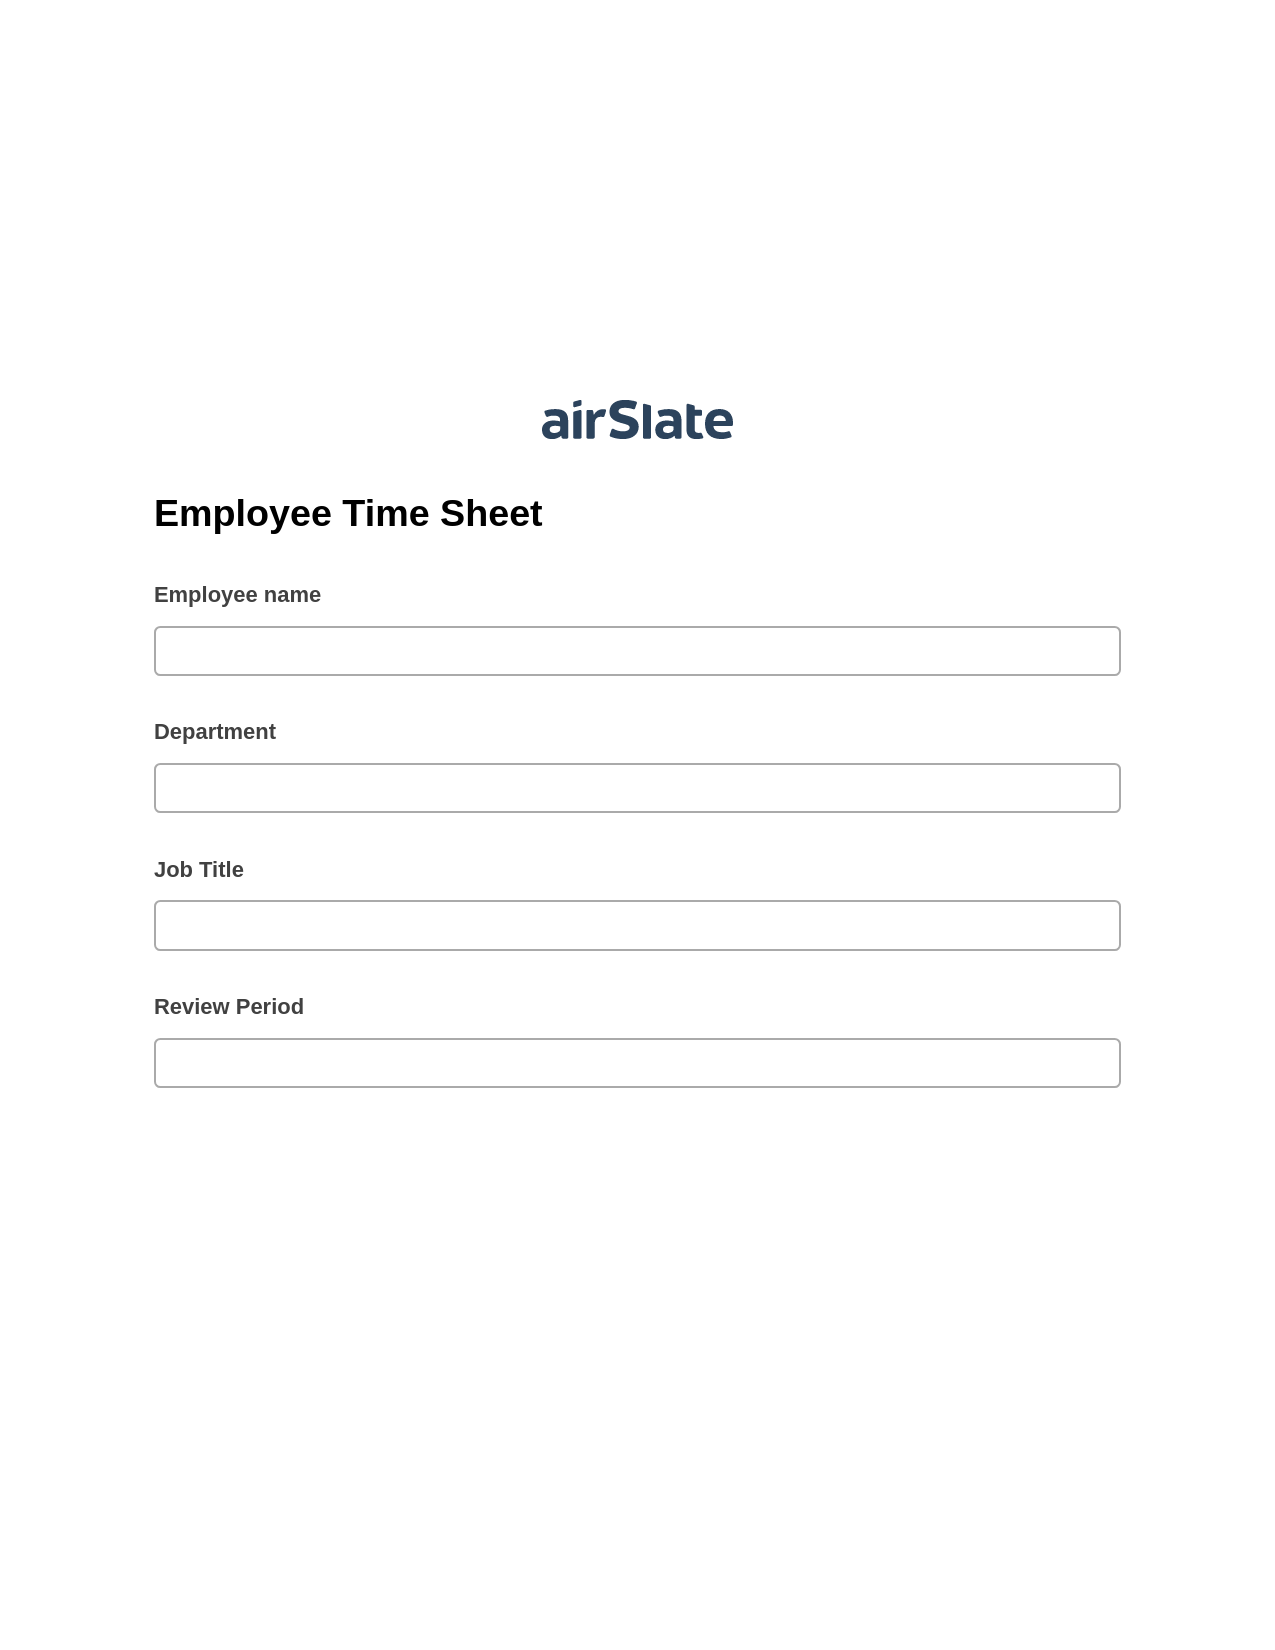 Multirole Employee Time Sheet Prefill from NetSuite records, Remove Slate Bot, Export to Smartsheet